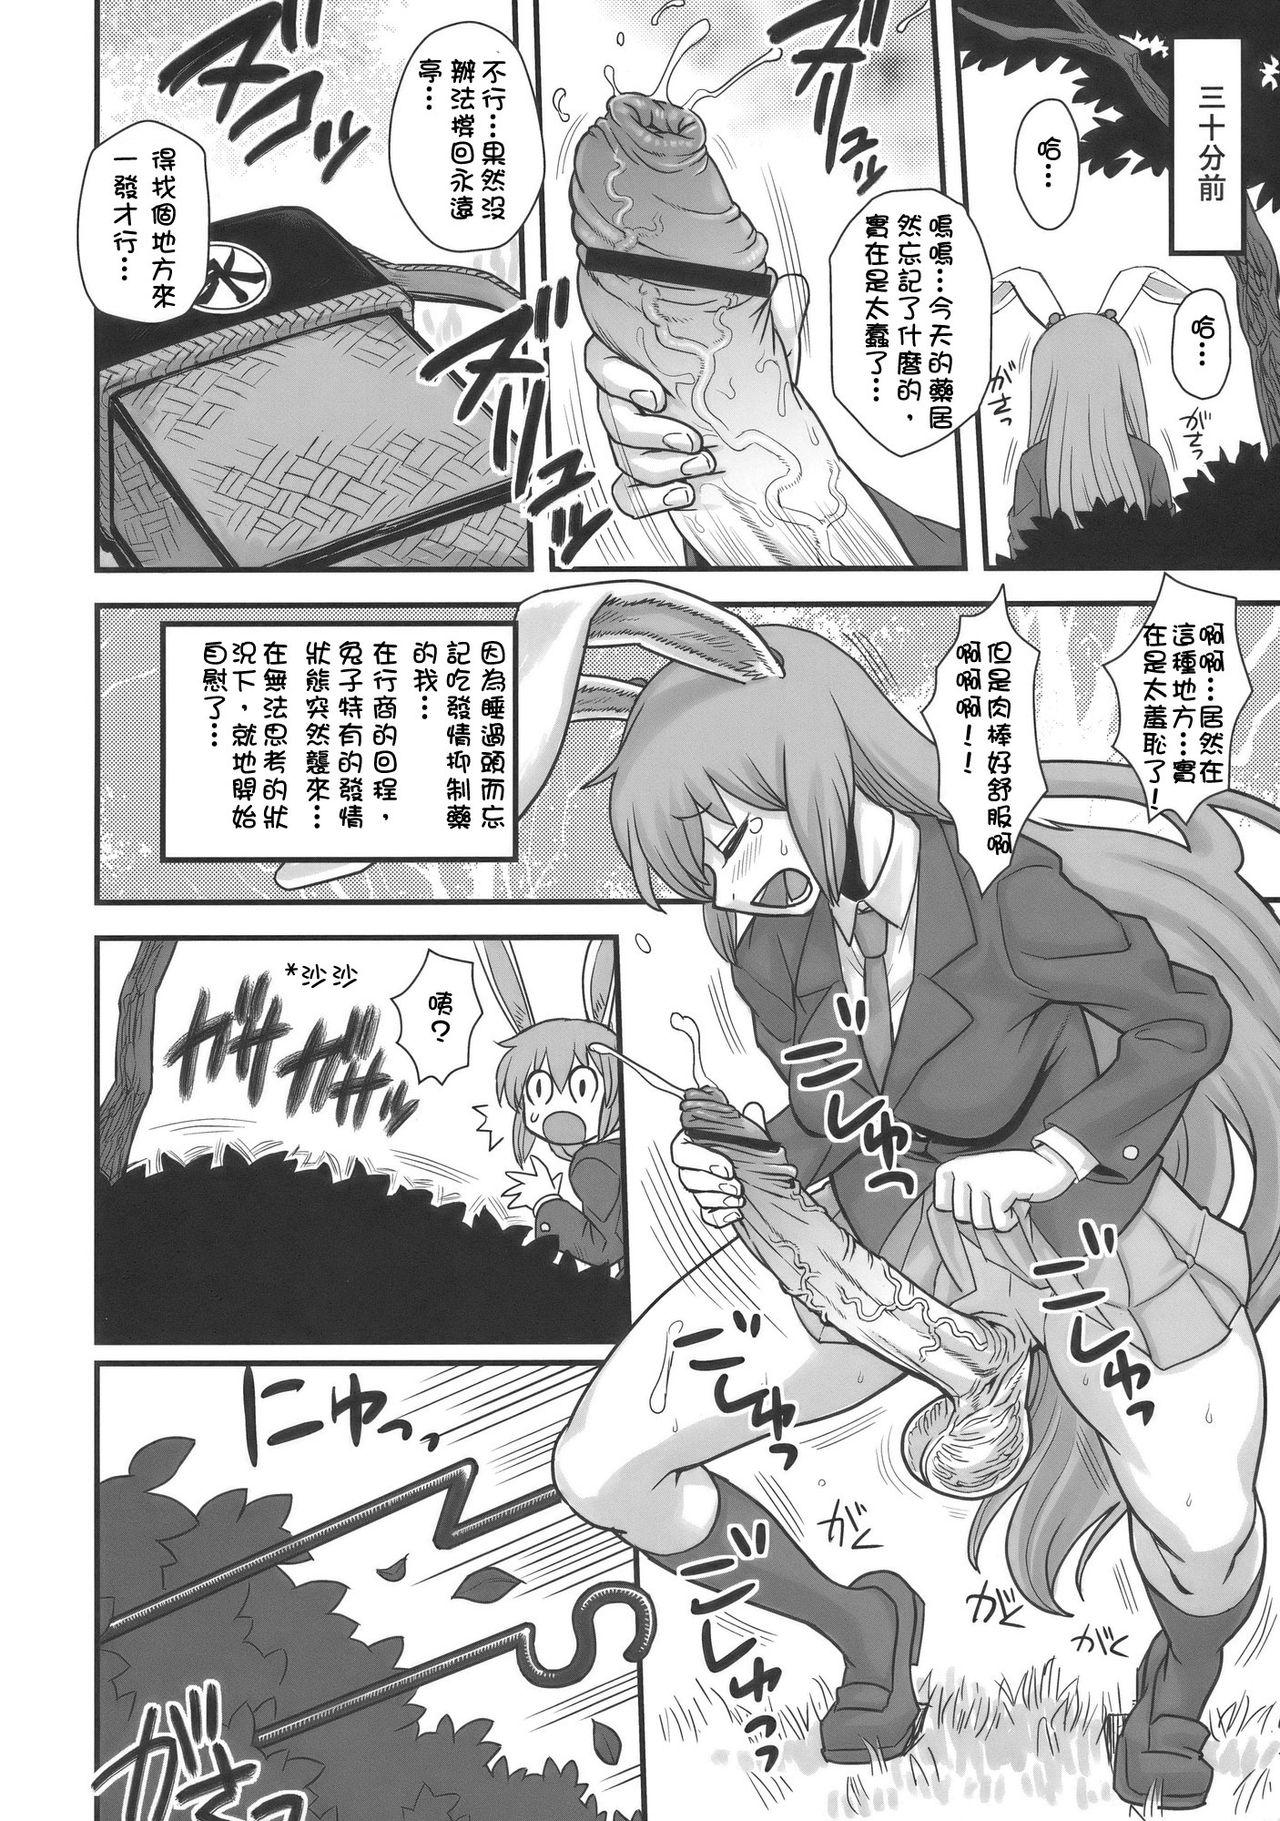 Cop Lunatic Udon - Touhou project People Having Sex - Page 4